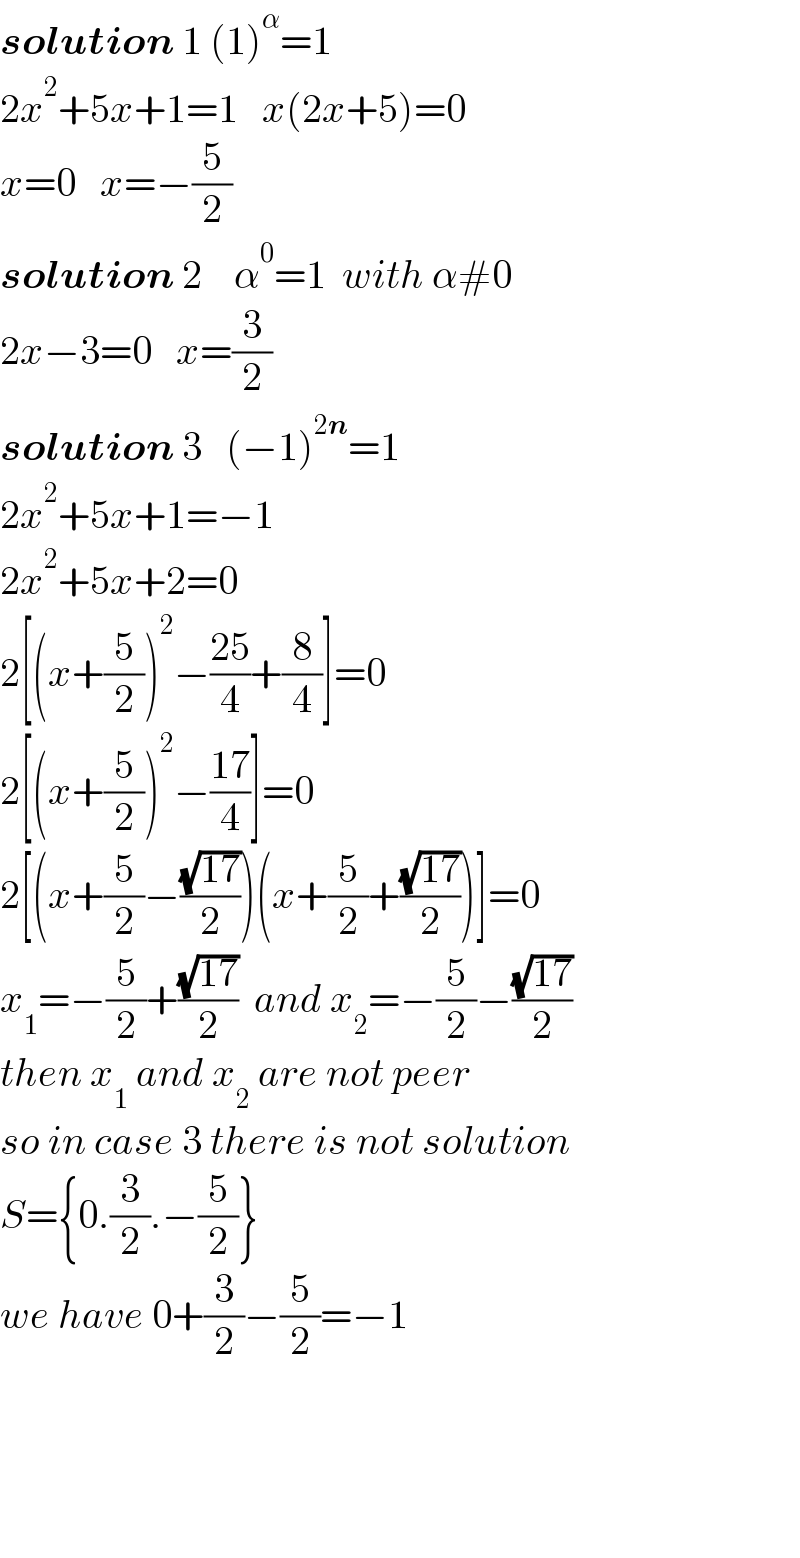 solution 1 (1)^α =1  2x^2 +5x+1=1   x(2x+5)=0  x=0   x=−(5/2)  solution 2    α^0 =1  with α#0  2x−3=0   x=(3/2)  solution 3   (−1)^(2n) =1  2x^2 +5x+1=−1    2x^2 +5x+2=0  2[(x+(5/2))^2 −((25)/4)+(8/4)]=0  2[(x+(5/2))^2 −((17)/4)]=0  2[(x+(5/2)−((√(17))/2))(x+(5/2)+((√(17))/2))]=0  x_1 =−(5/2)+((√(17))/2)  and x_2 =−(5/2)−((√(17))/2)  then x_1  and x_2  are not peer  so in case 3 there is not solution  S={0.(3/2).−(5/2)}  we have 0+(3/2)−(5/2)=−1          